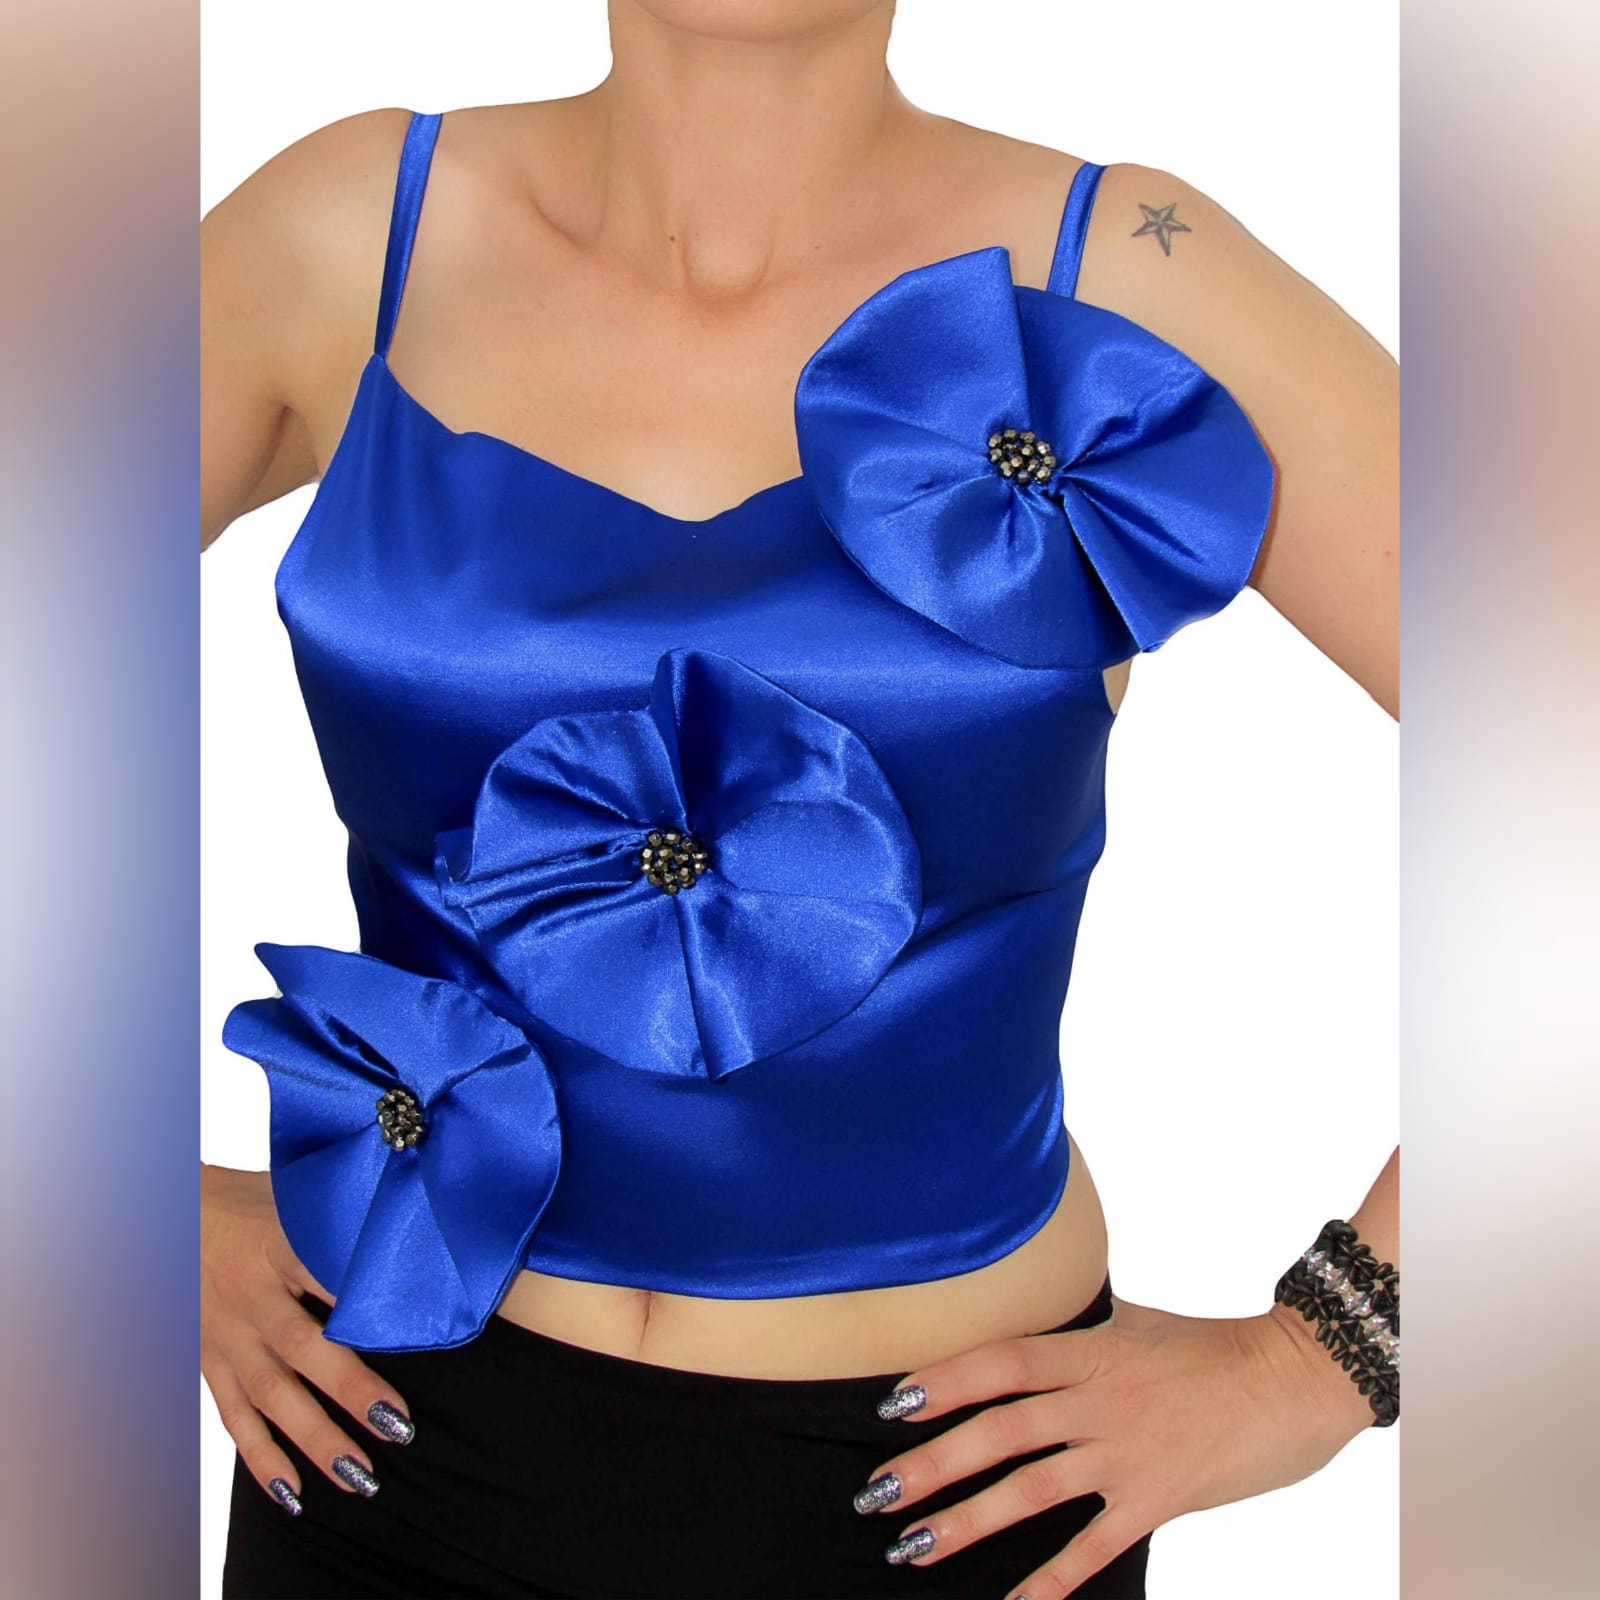 Elegant royal blue flower detail top 3 elegant royal blue flower detail top. Handmade top, a unique design made in several colours. Made in satin with a luxurious shine, perfect for a smart casual event, or even for a more formal event. Made with a lace-up open back to add a sexy touch to the top. And to adjust the fit accordingly.